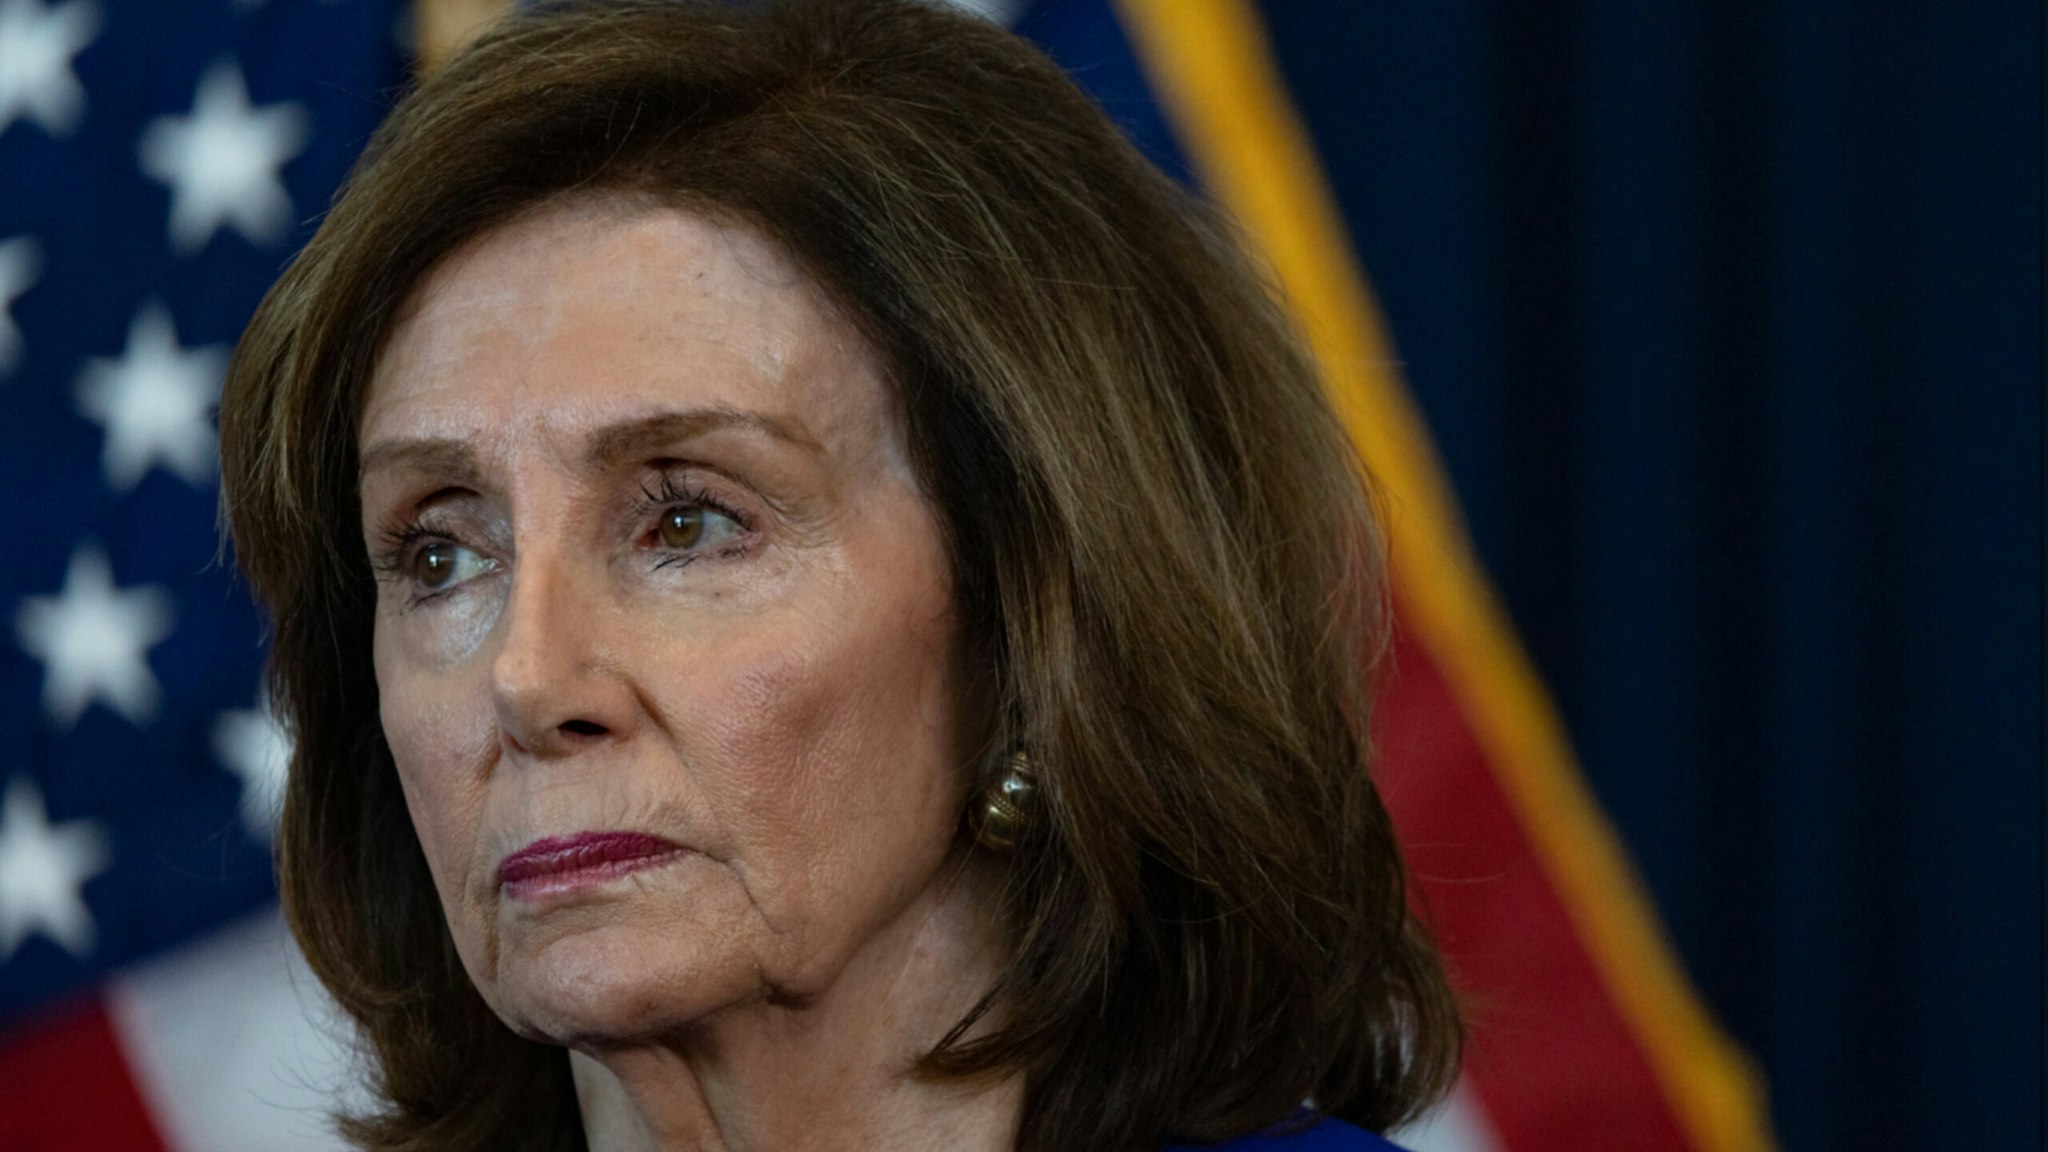 U.S. House Speaker Nancy Pelosi, a Democrat from California, listens during a news conference at the House Democratic Caucus Issues Conference meeting in Philadelphia, Pennsylvania, U.S., on Friday, March 11, 2022.